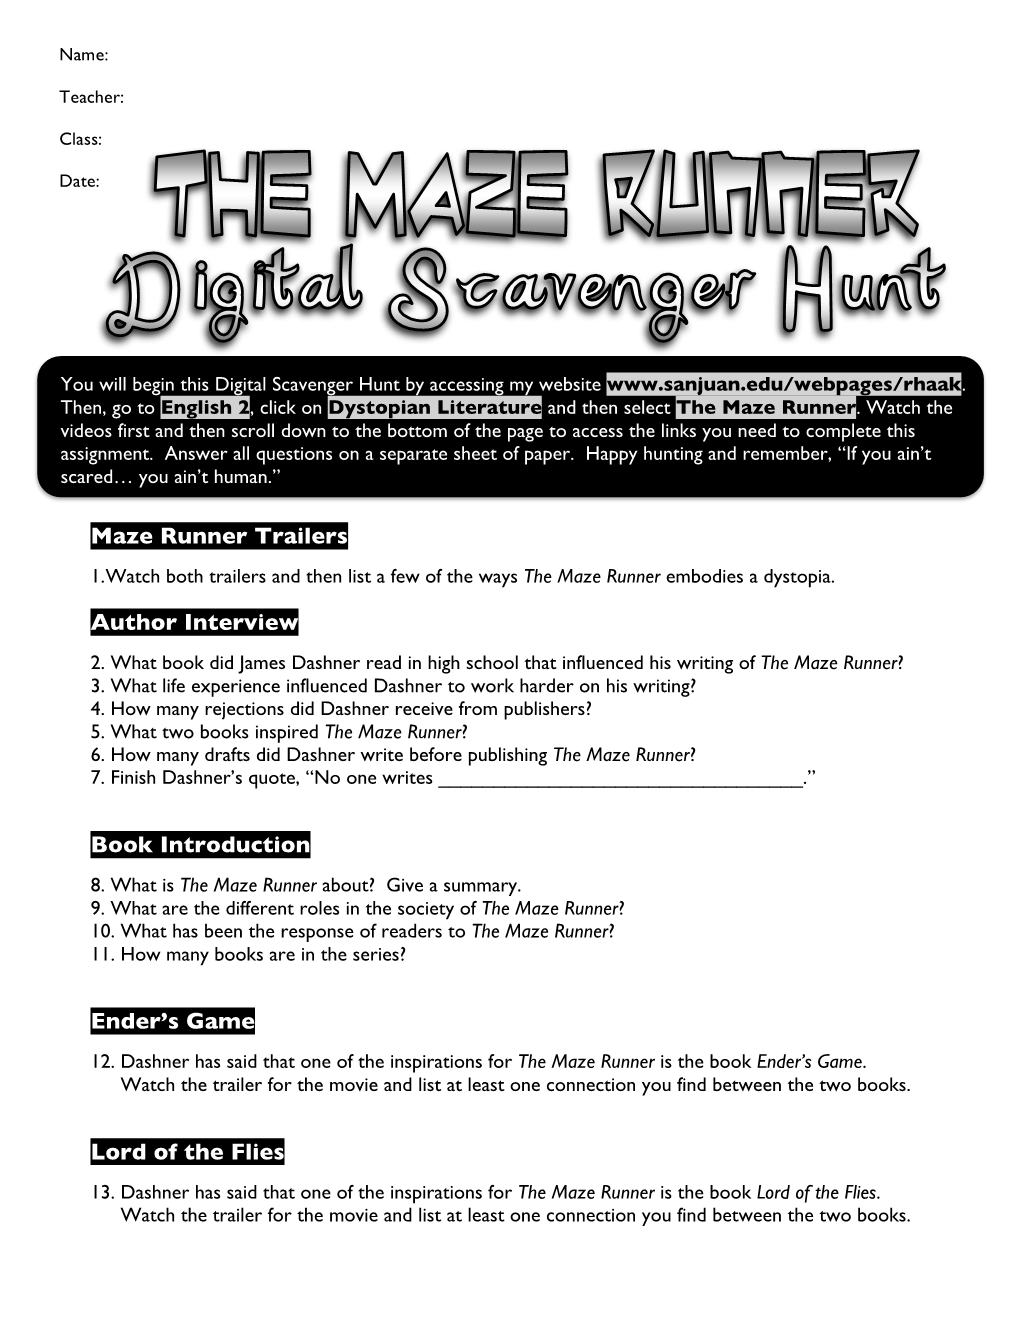 Maze Runner Trailers Author Interview Book Introduction Ender's Game